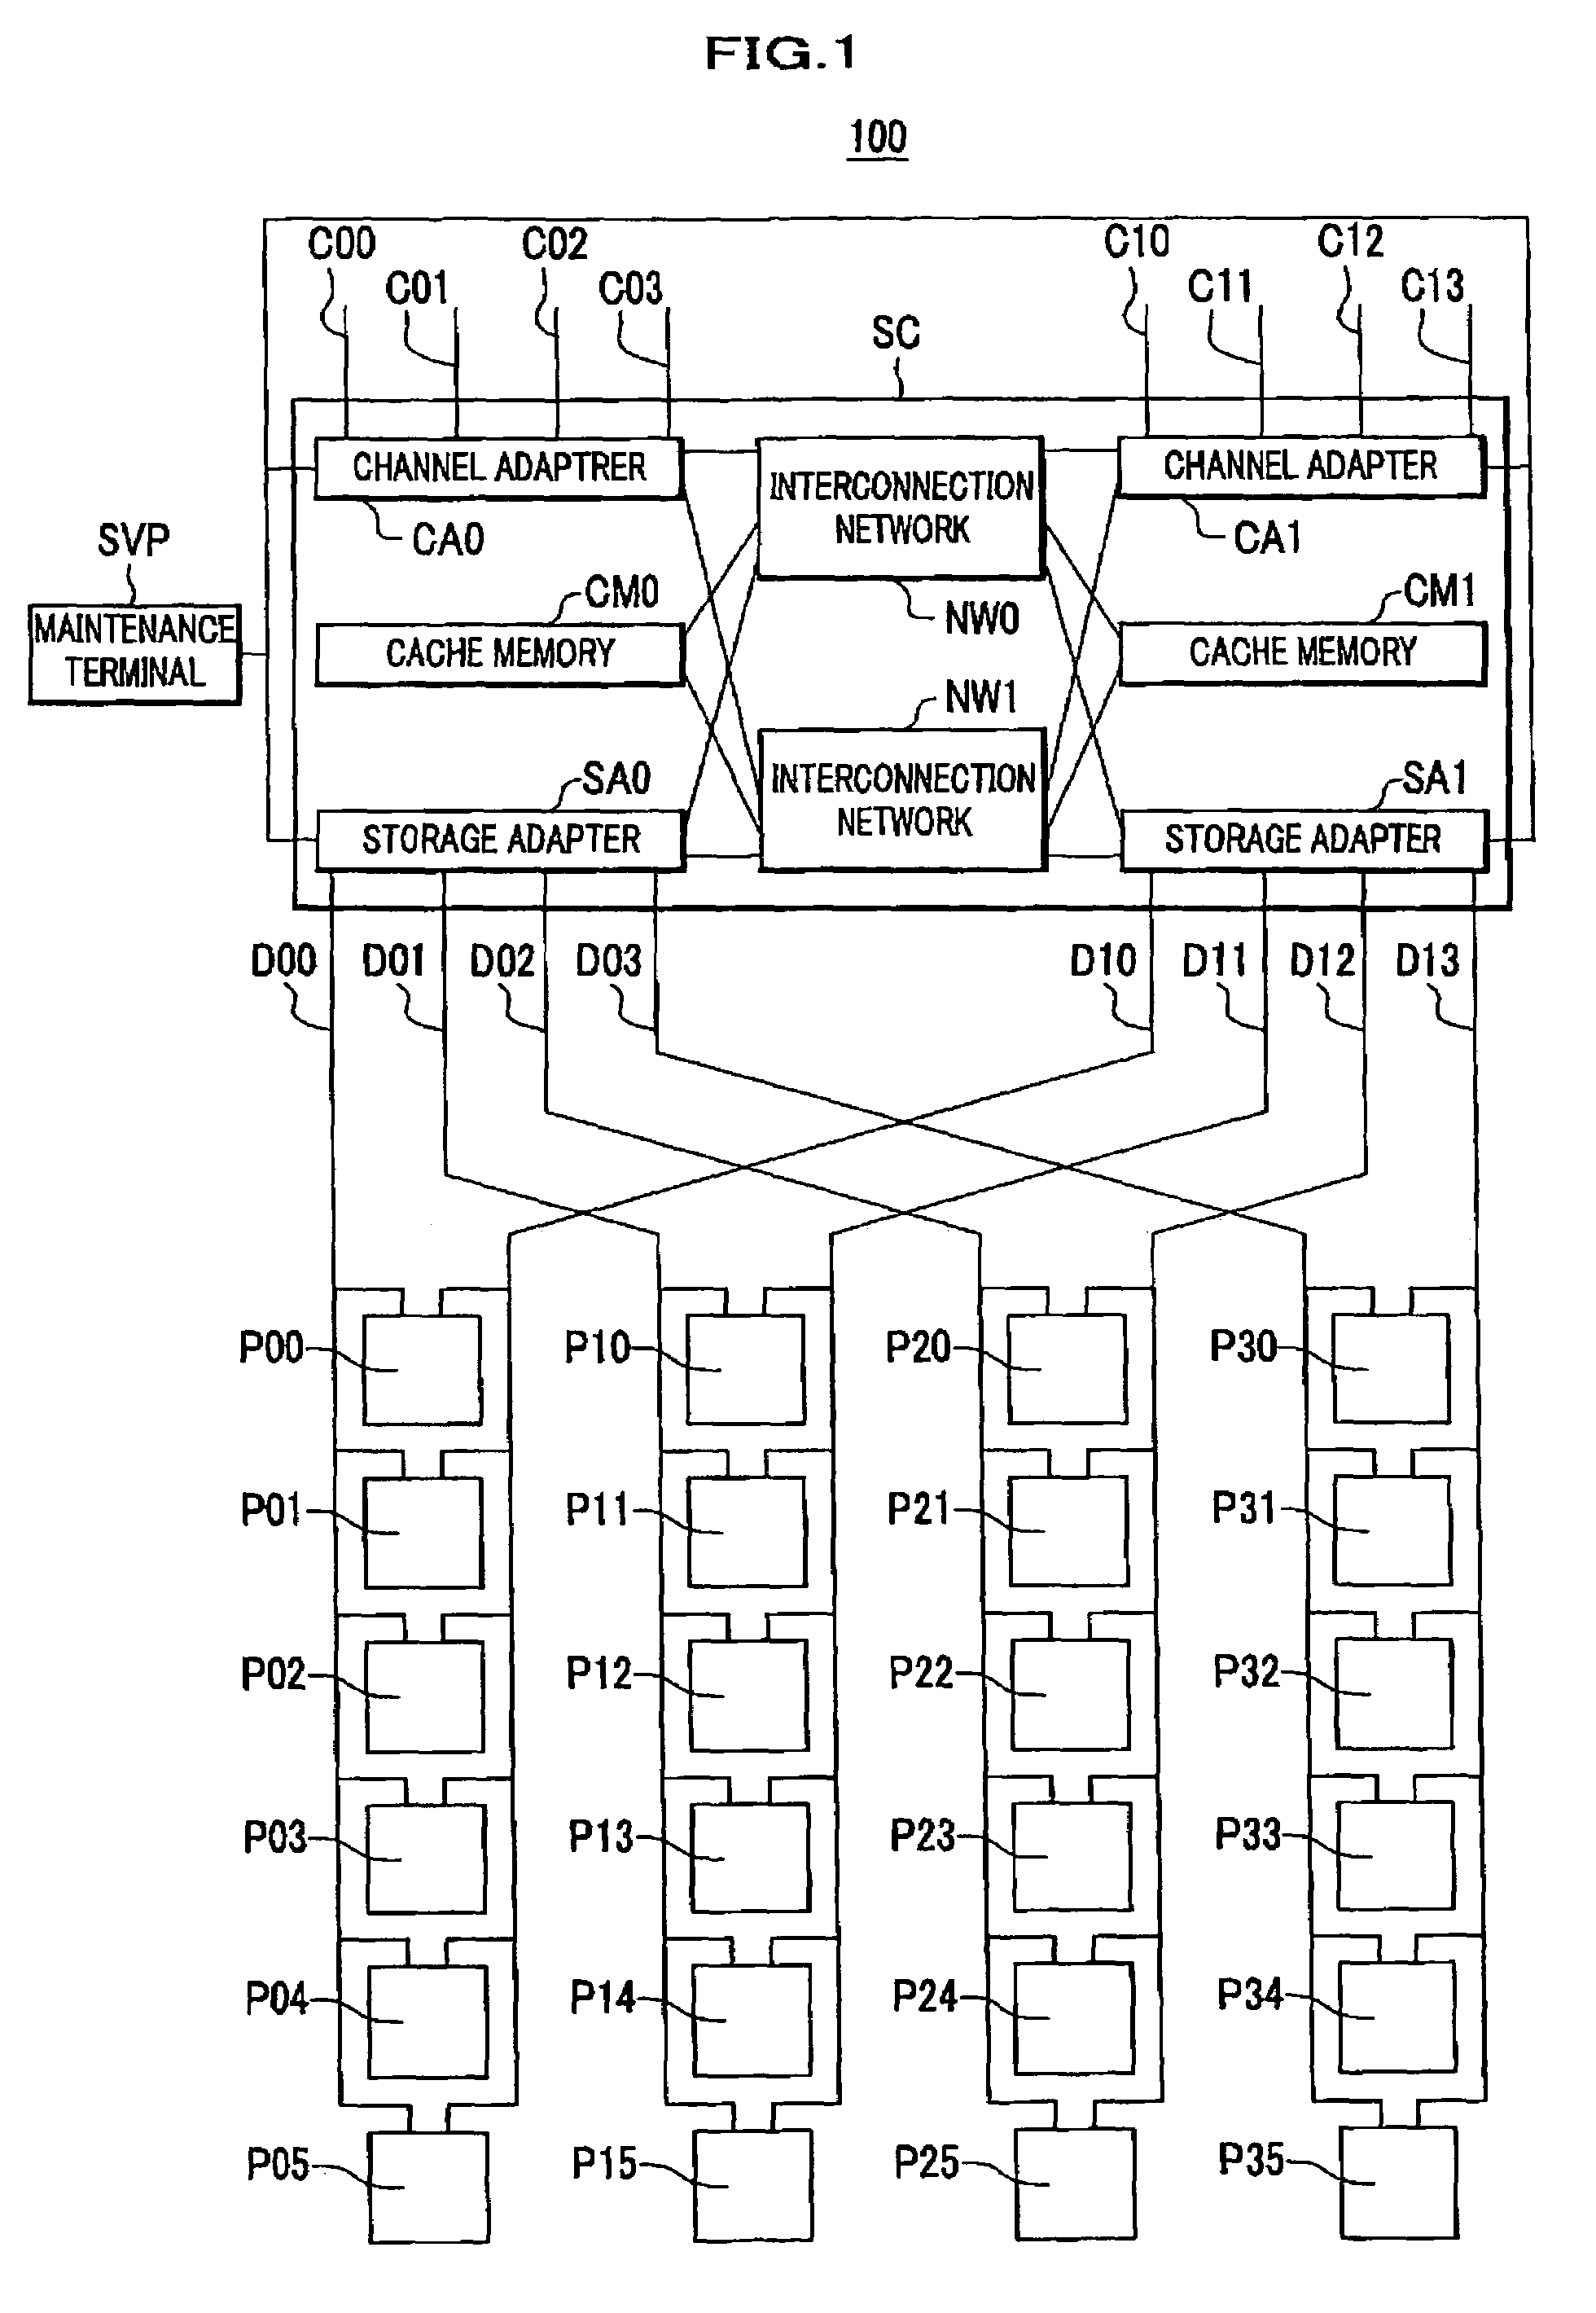 Storage system using flash memory modules logically grouped for wear-leveling and RAID